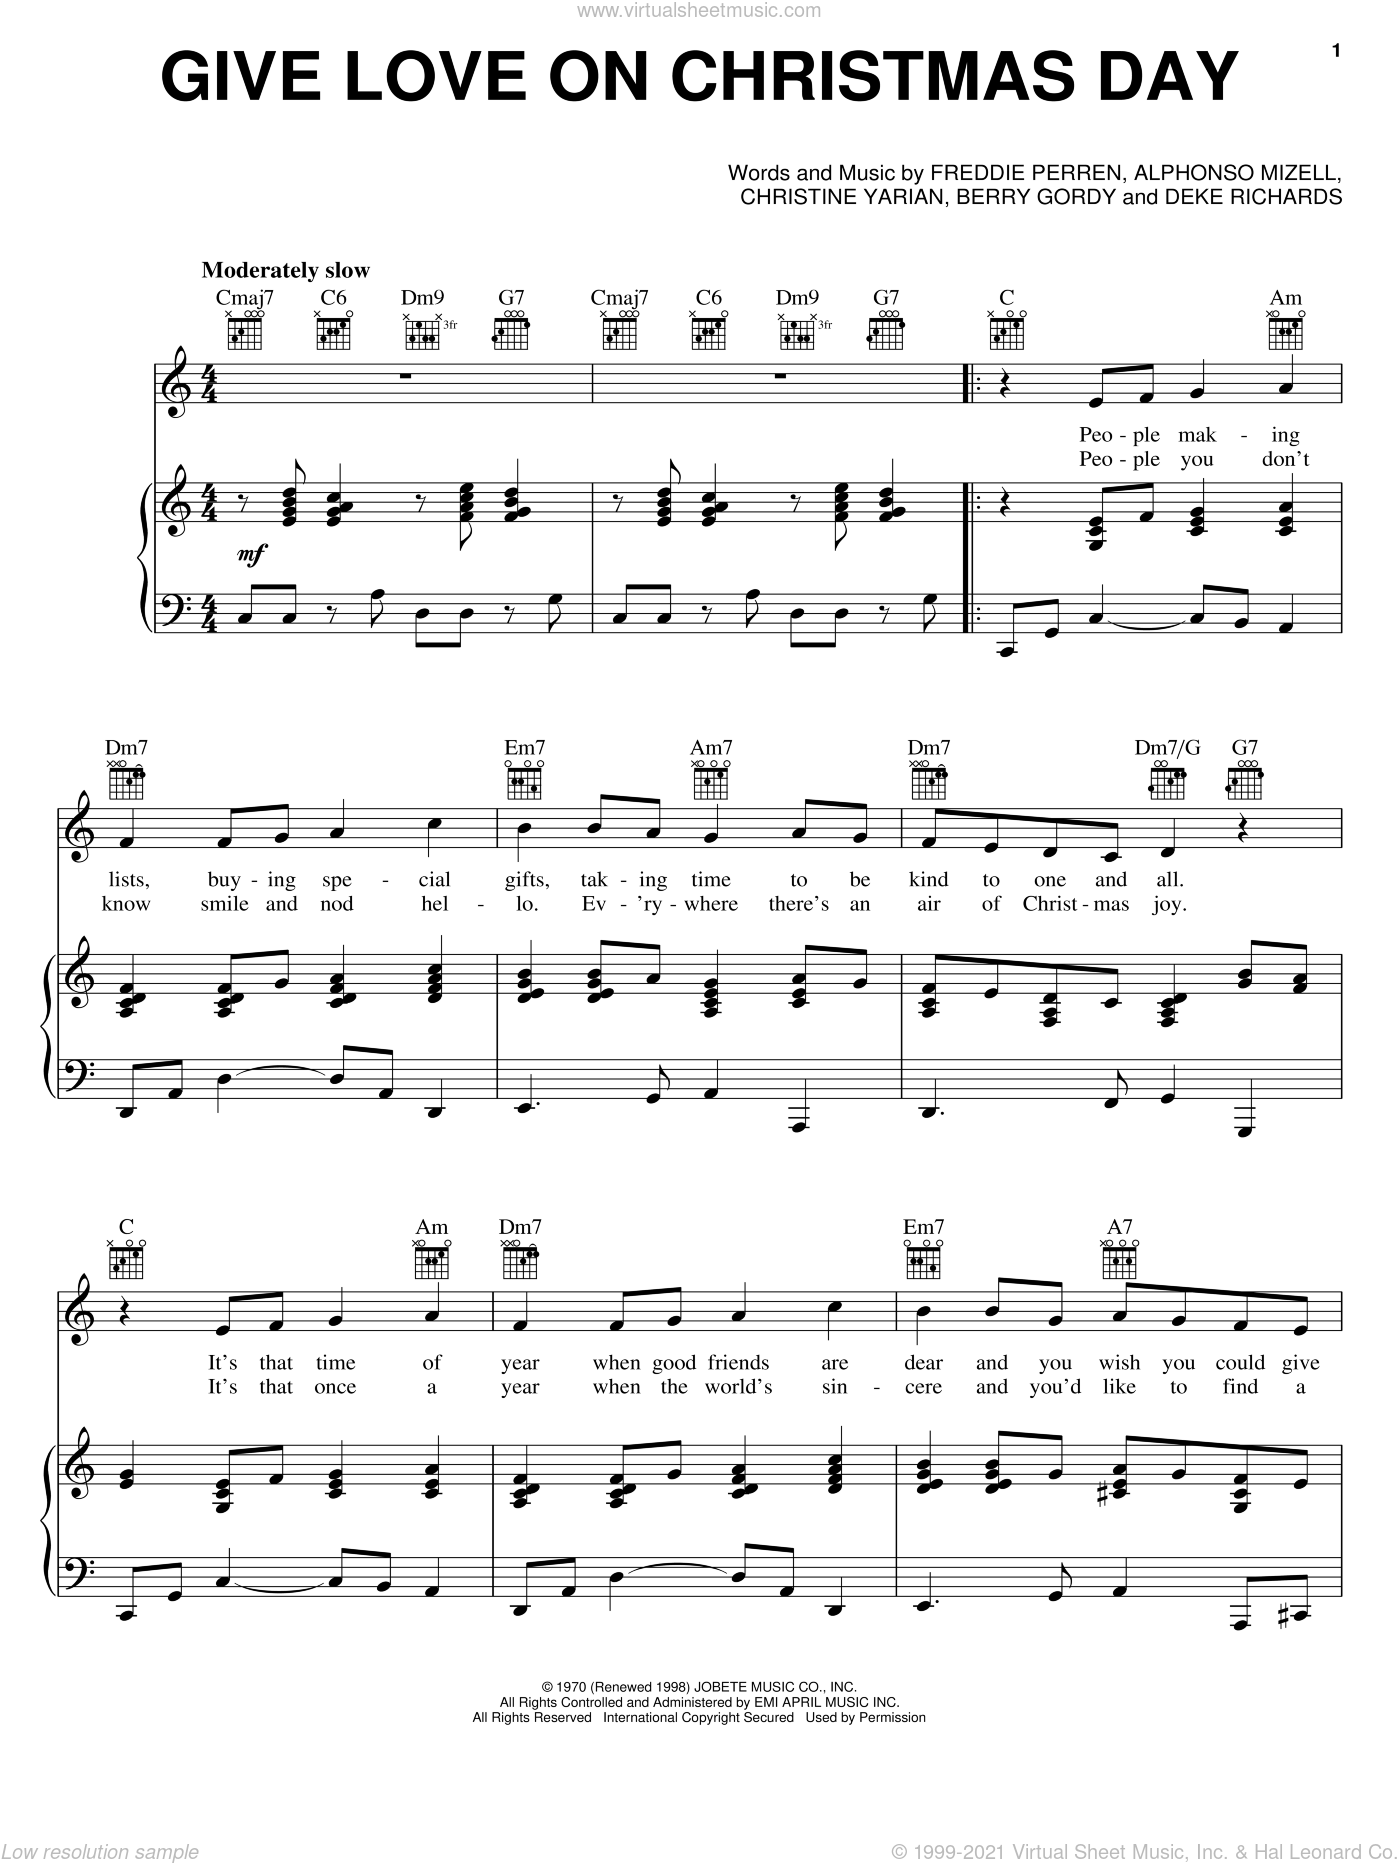 Gill - Give Love On Christmas Day sheet music for voice, piano or guitar